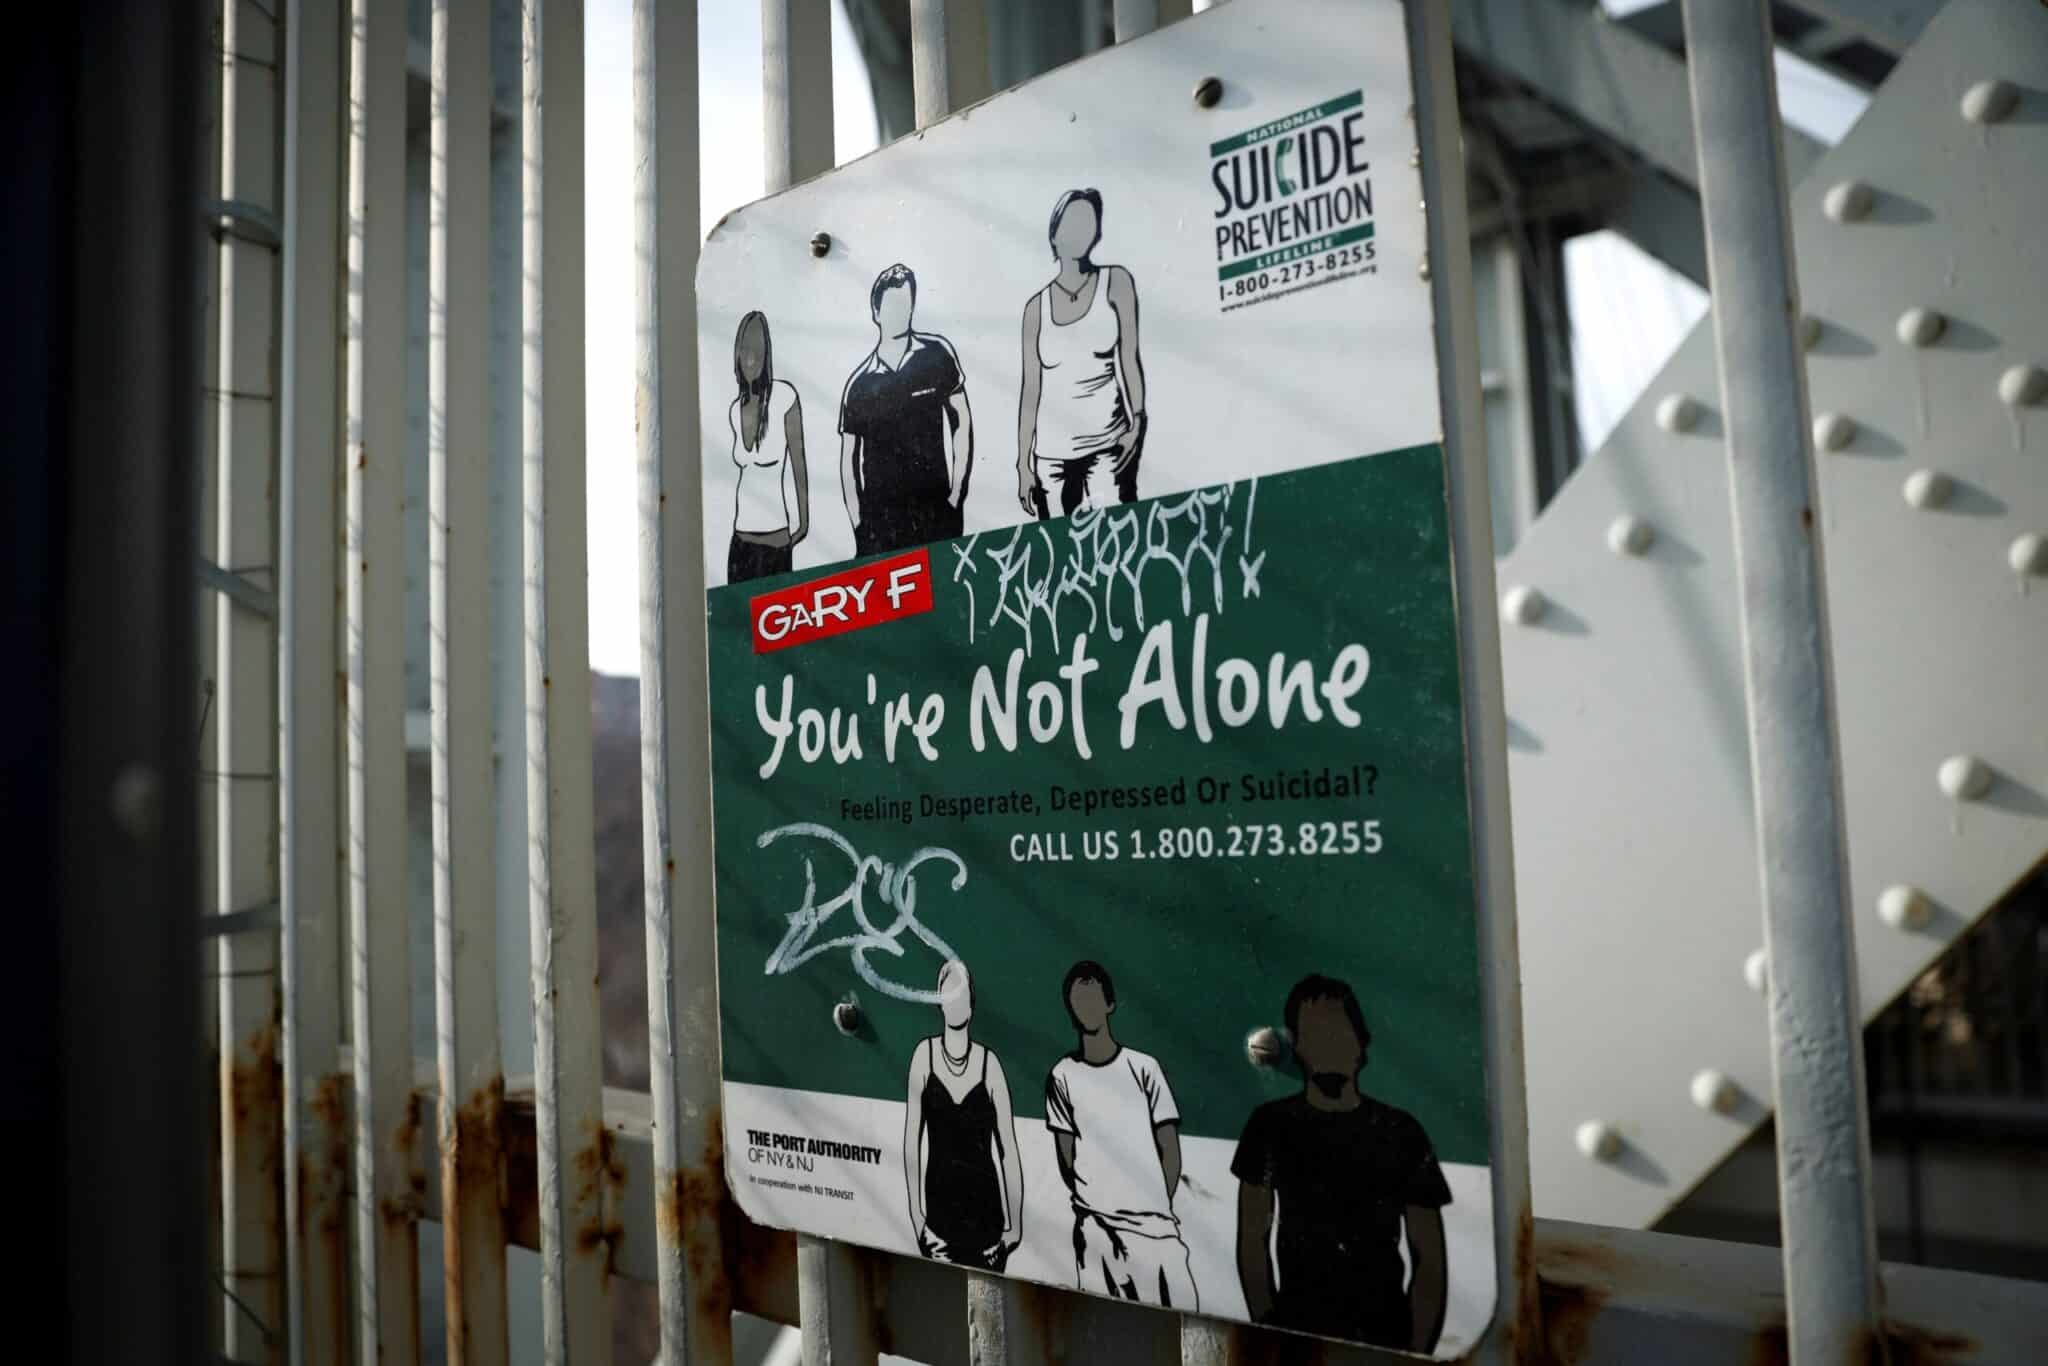 A suicide prevention sign is pictured on a protective fence on the walkway of the George Washington Bridge in New York City Jan. 12, 2022. (OSV News photo/Mike Segar, Reuters)